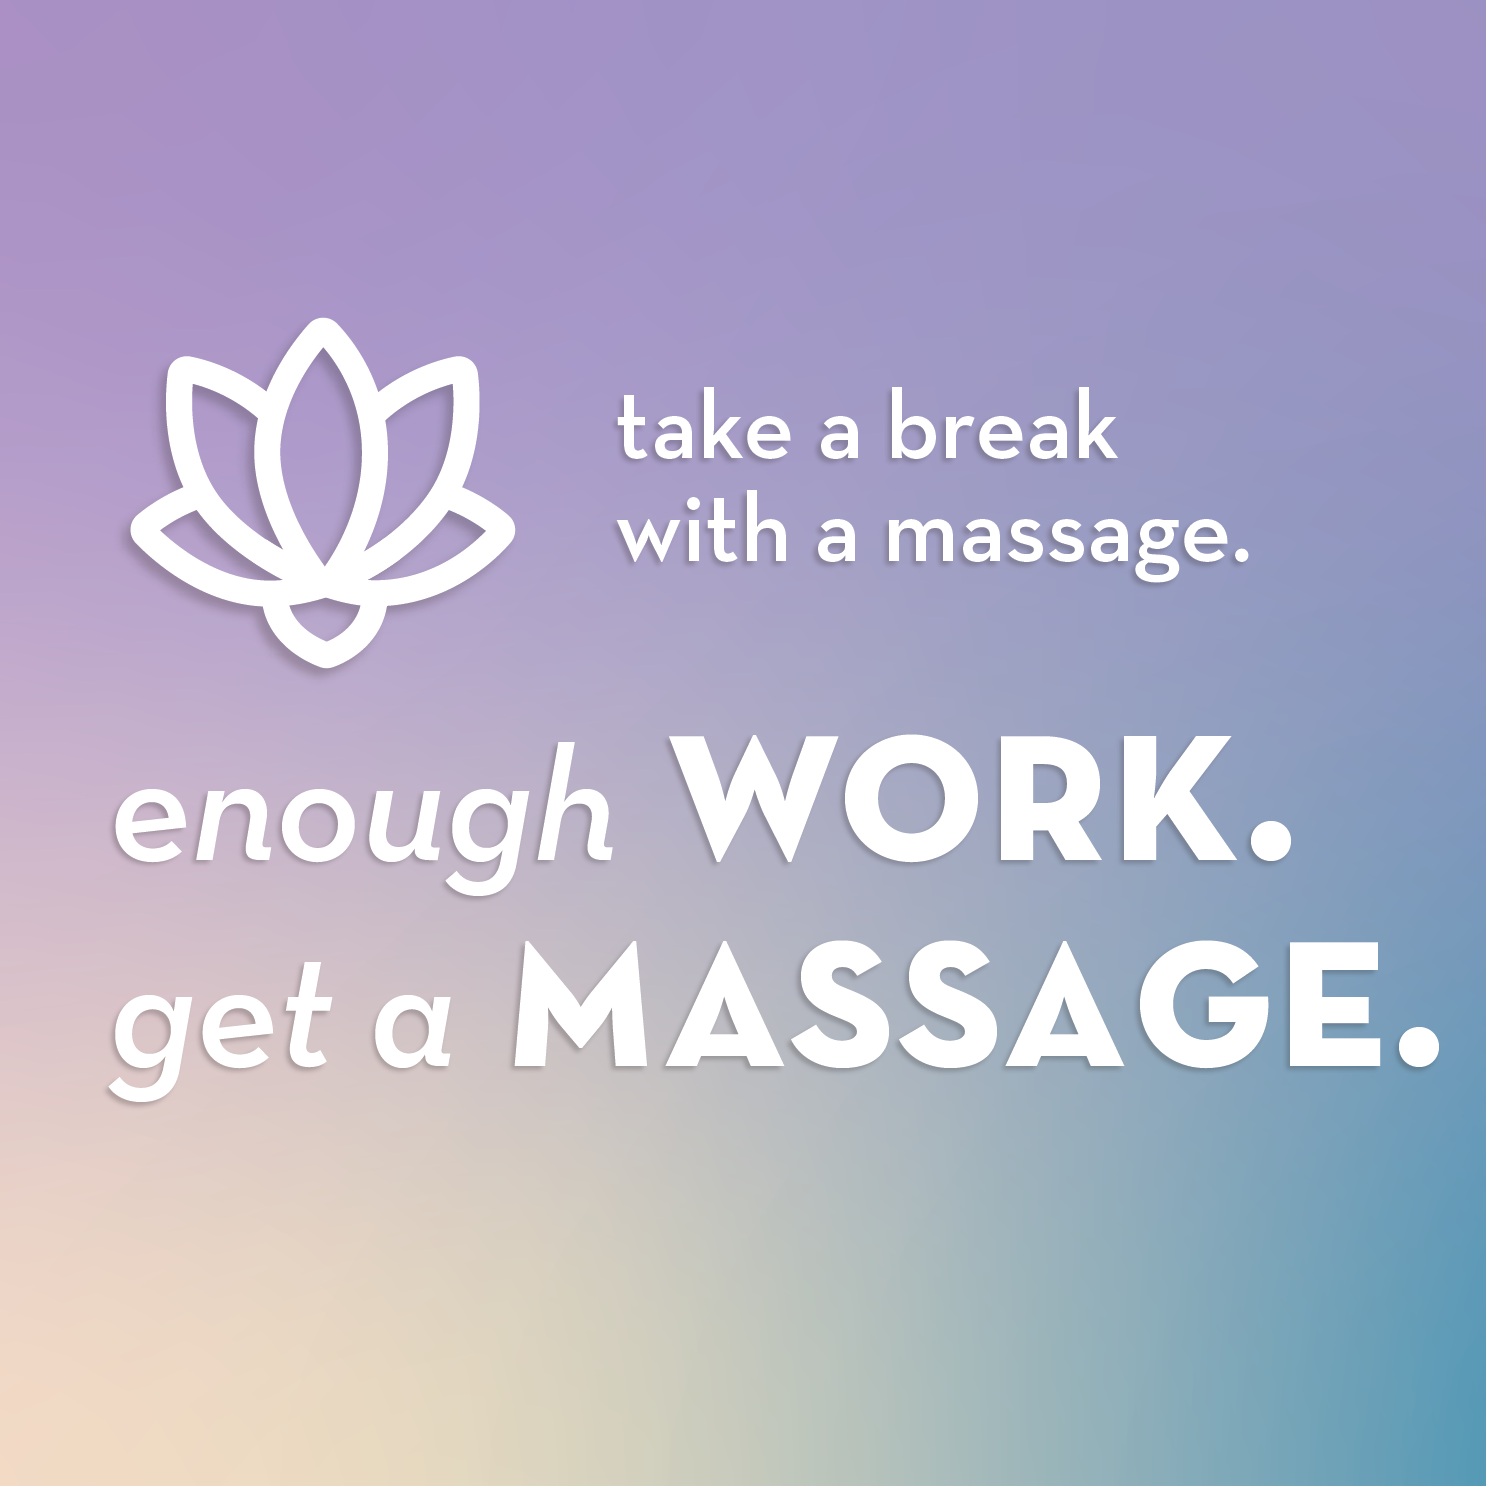 cool toned gradient graphic with the text "enough work, get a massage. take a break with massage."